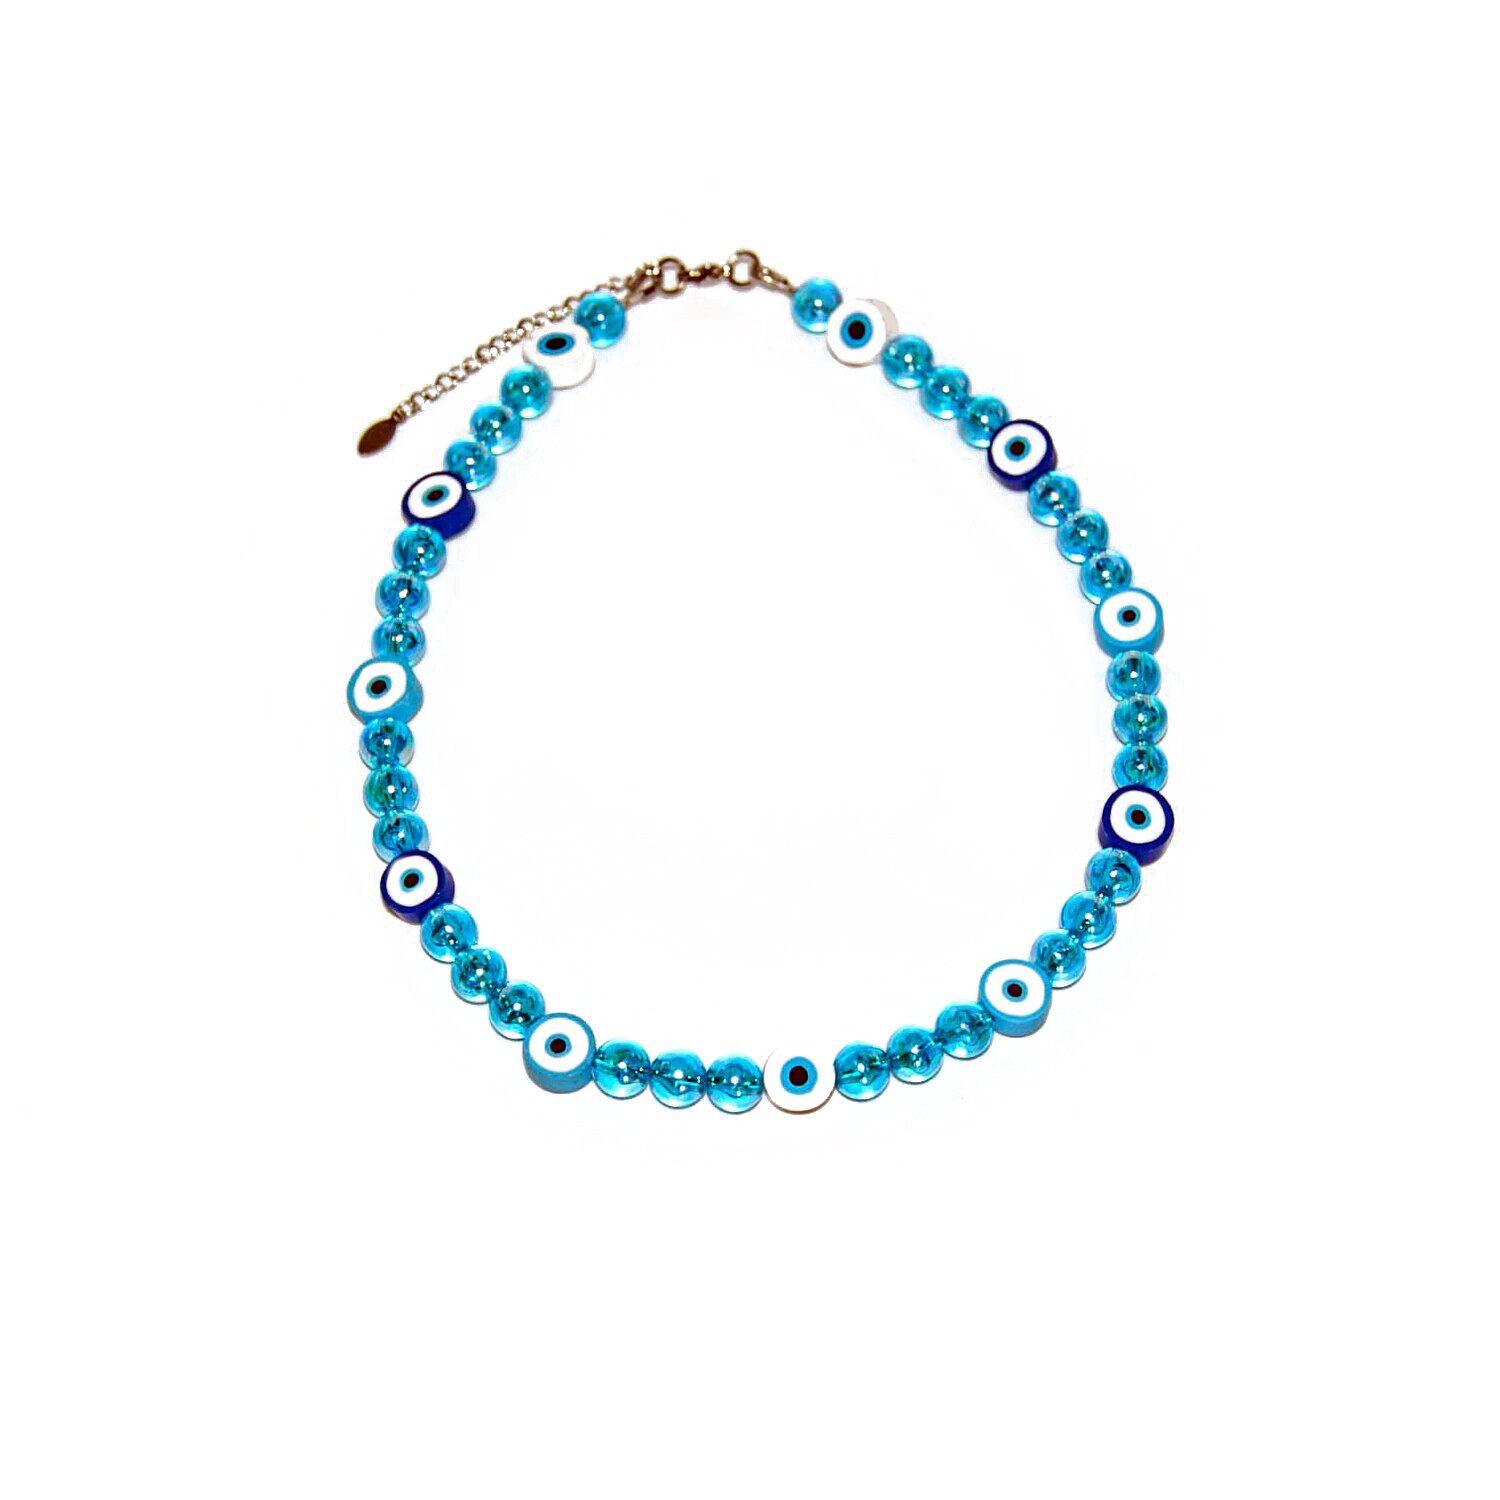 Blue pearl necklace with Evil eye clay beads